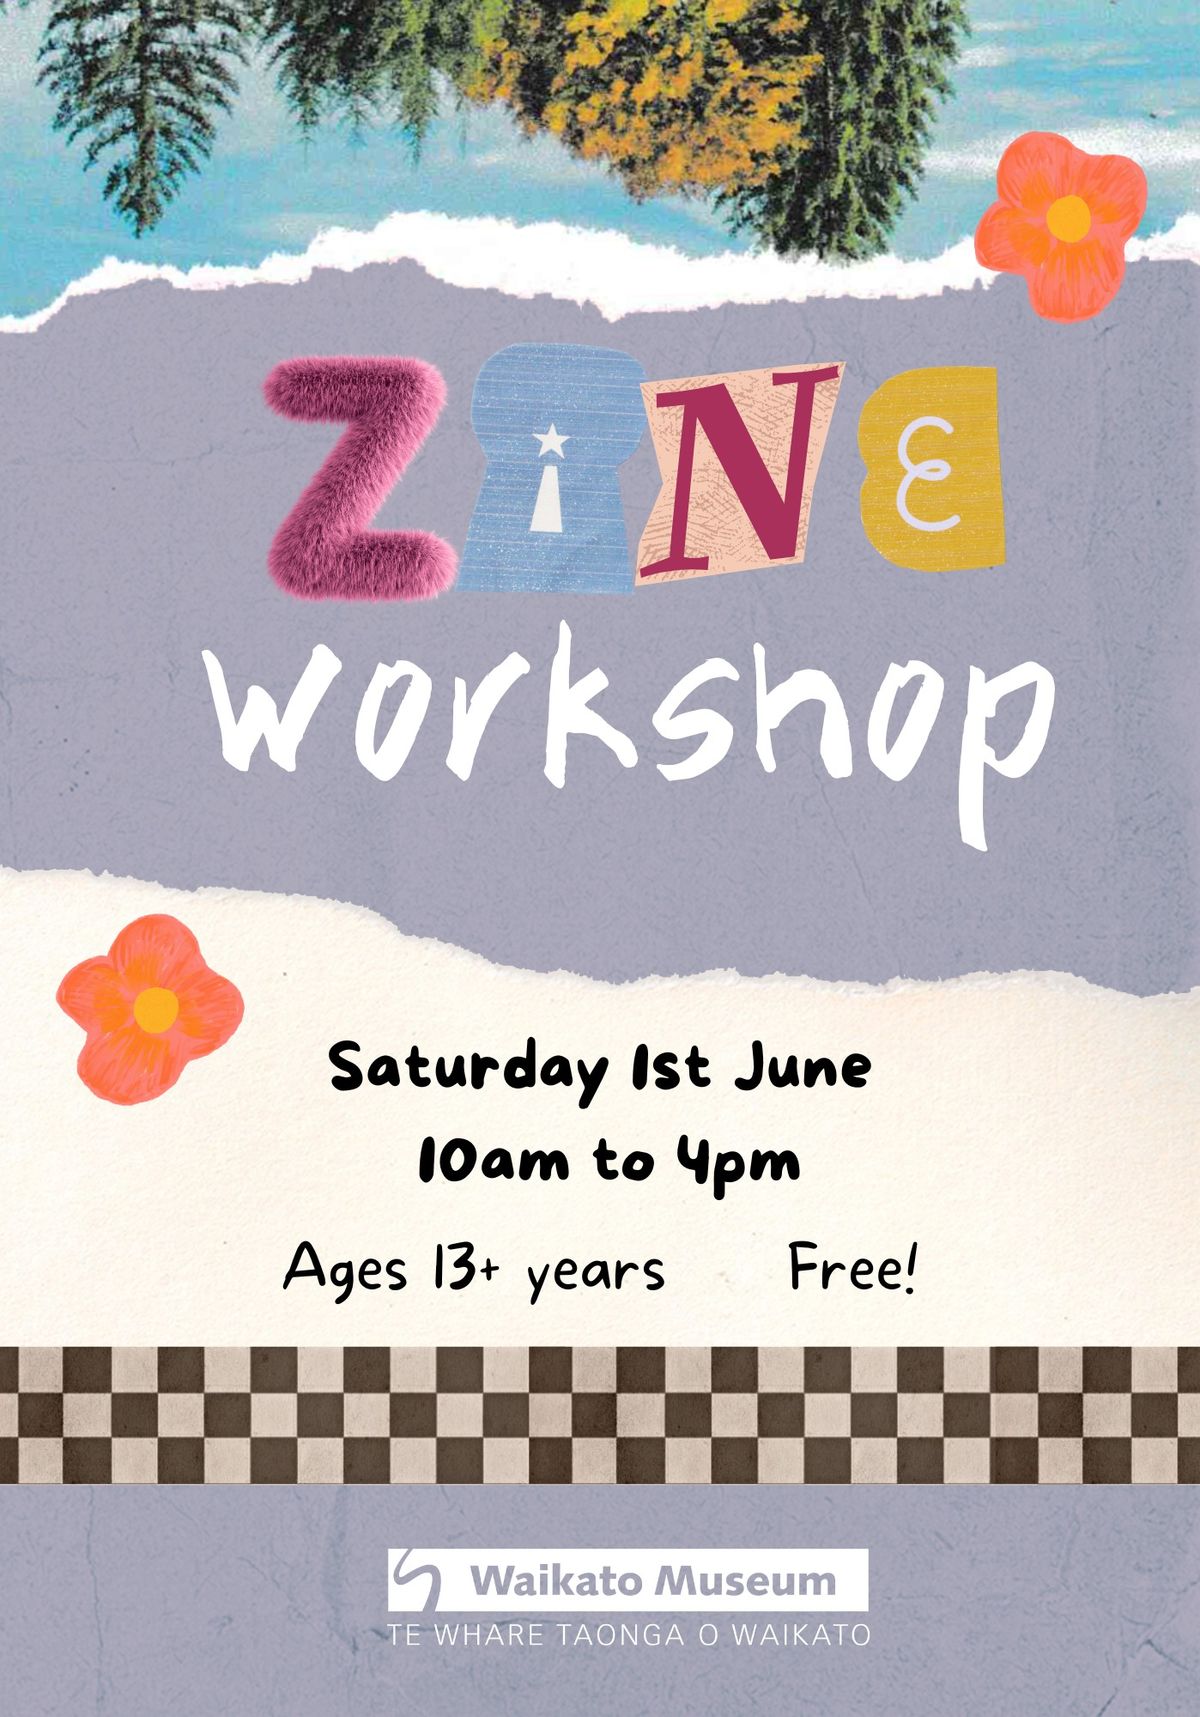 Save the planet, make a zine! FREE WORKSHOP